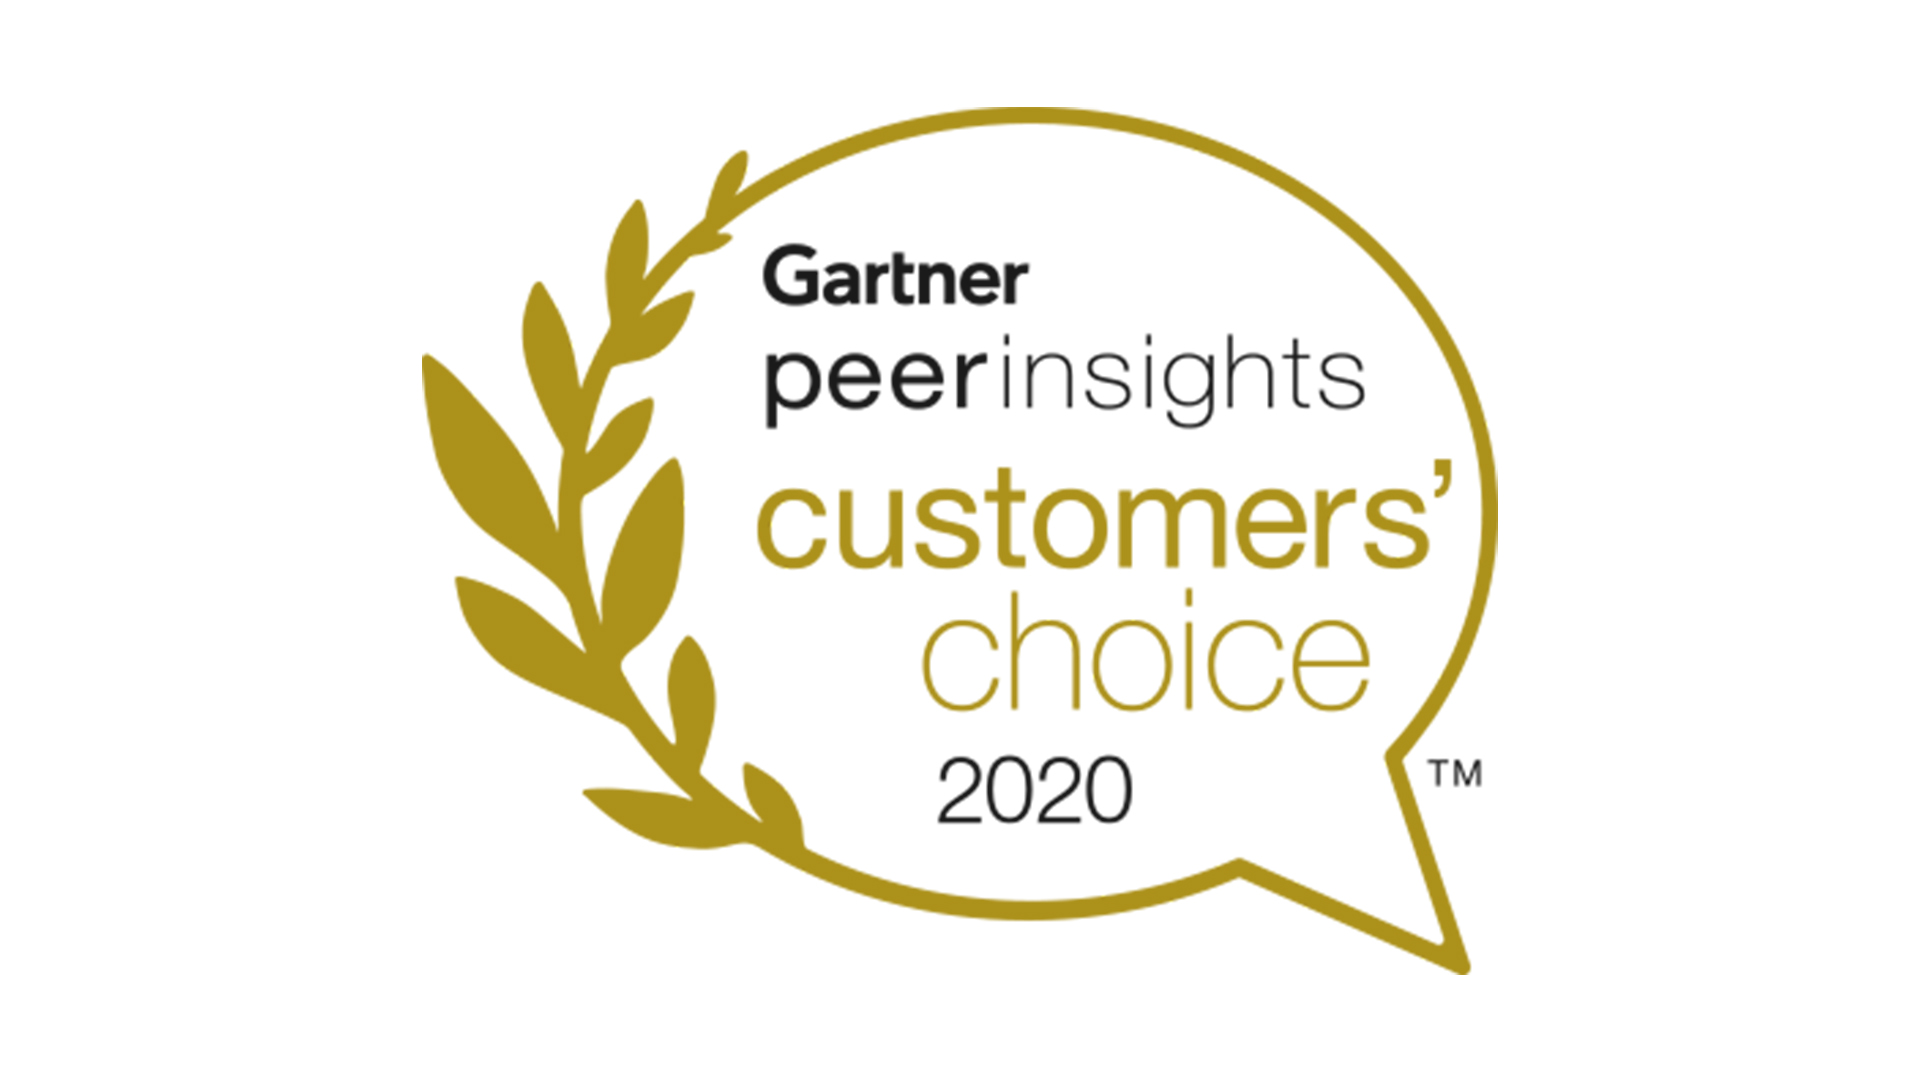 The Trade Desk On Twitter The Trade Desk Has Been Recognized As A Gartner Inc S 2020 Customers Choice In Ad Tech Based On Customer Reviews From Gartner Peer Insights Including Perfect Platform For